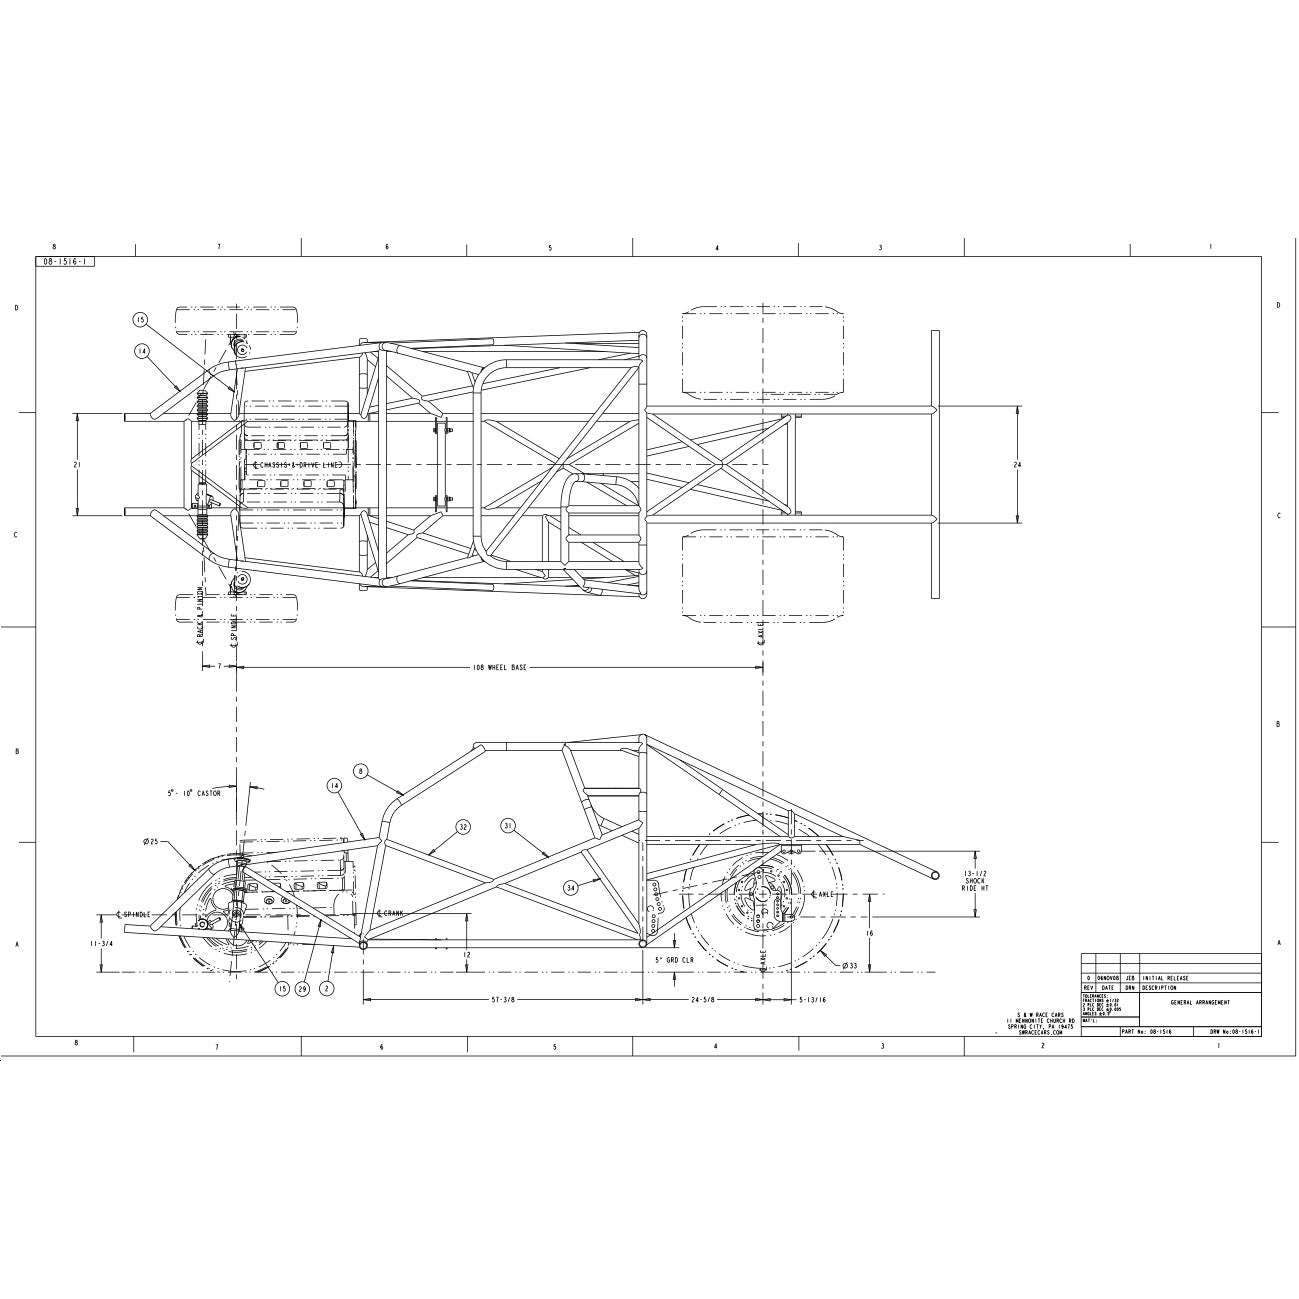 1962-1967 Chevrolet Chevy II Tube Chassis Blueprint